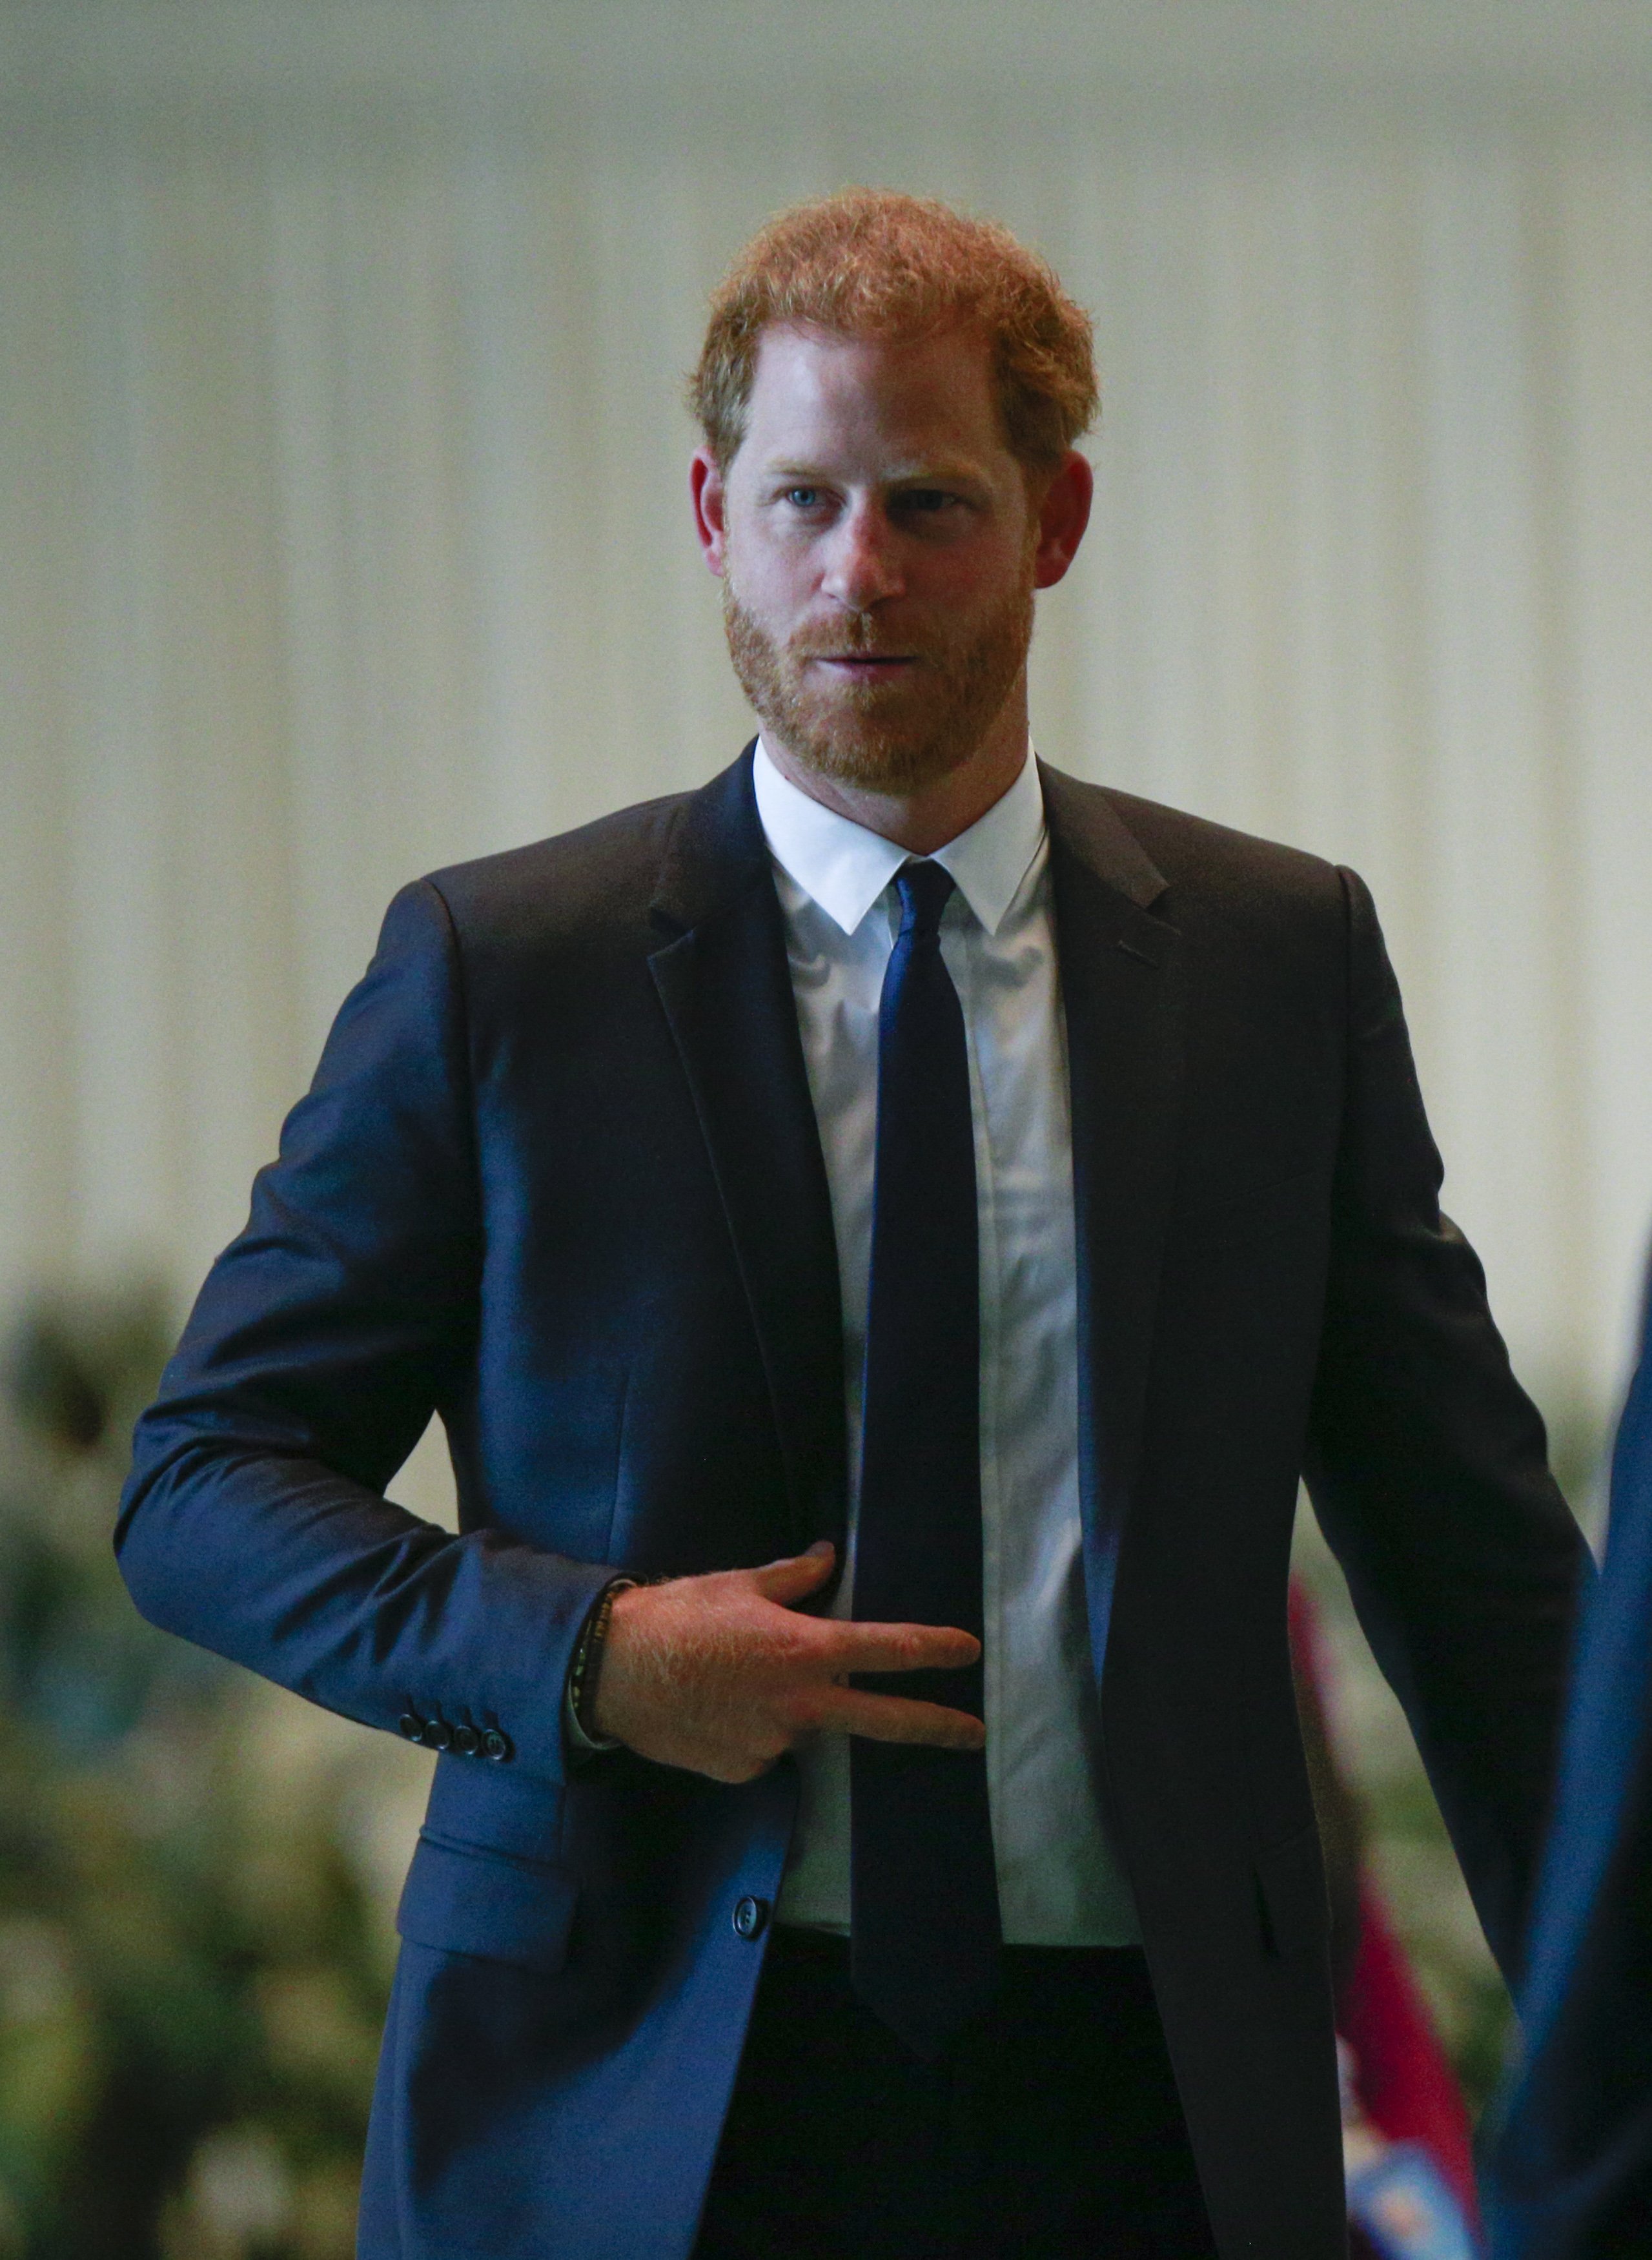 Prince Harry attends the 2020 UN Nelson Mandela Prize award ceremony at the United Nations in New York on July 18, 2022. | Source: Getty Images